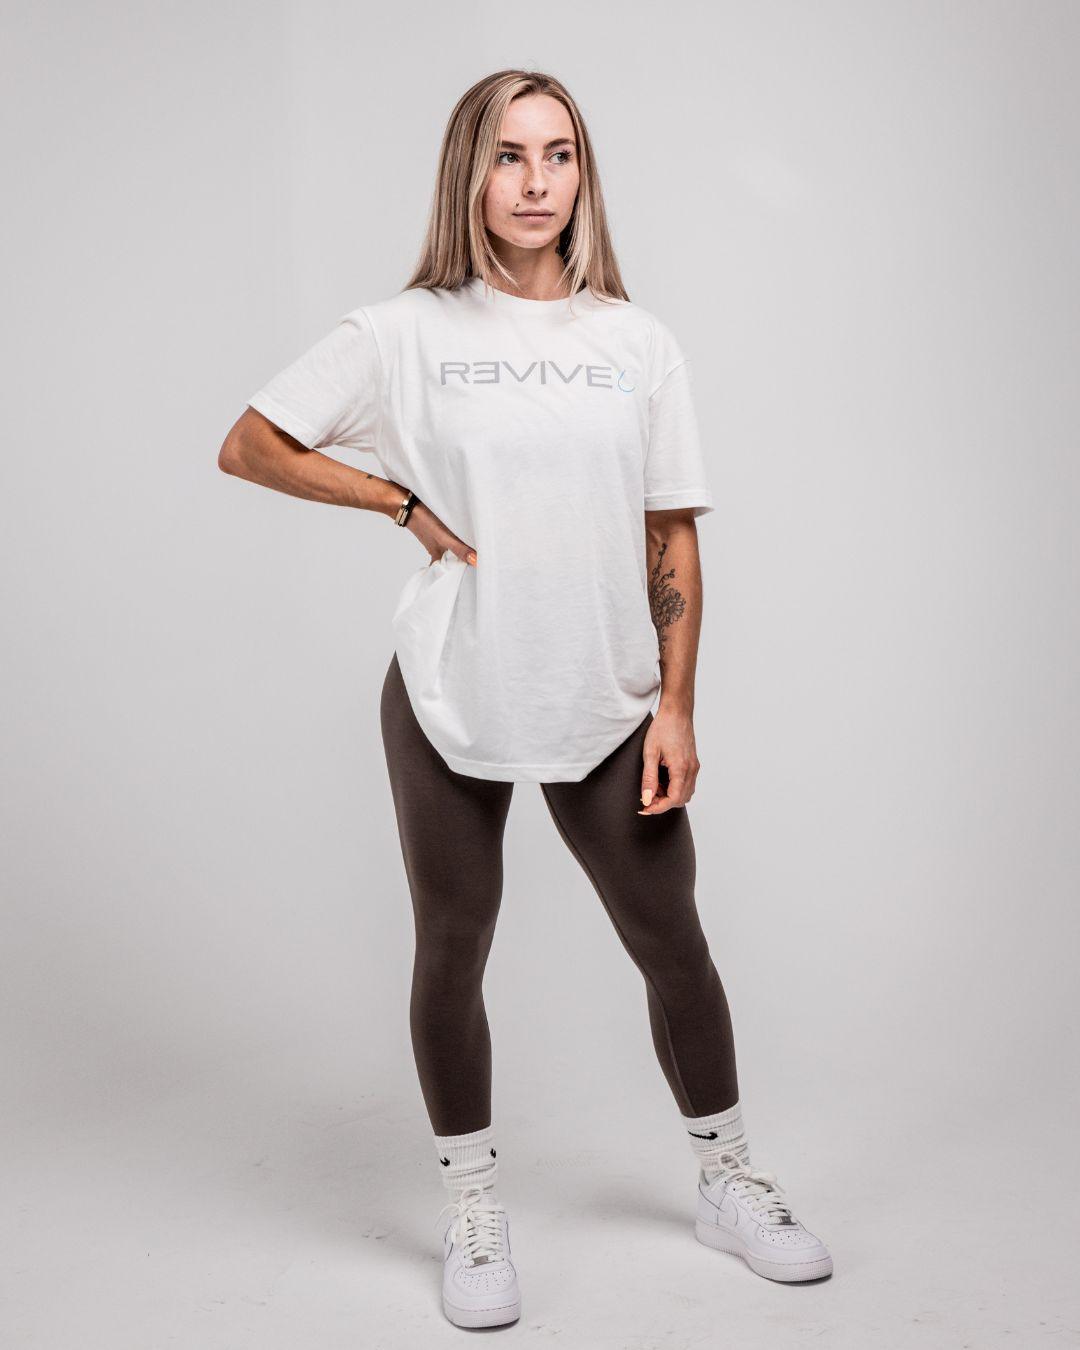 White Revive T-shirt - Revive MD